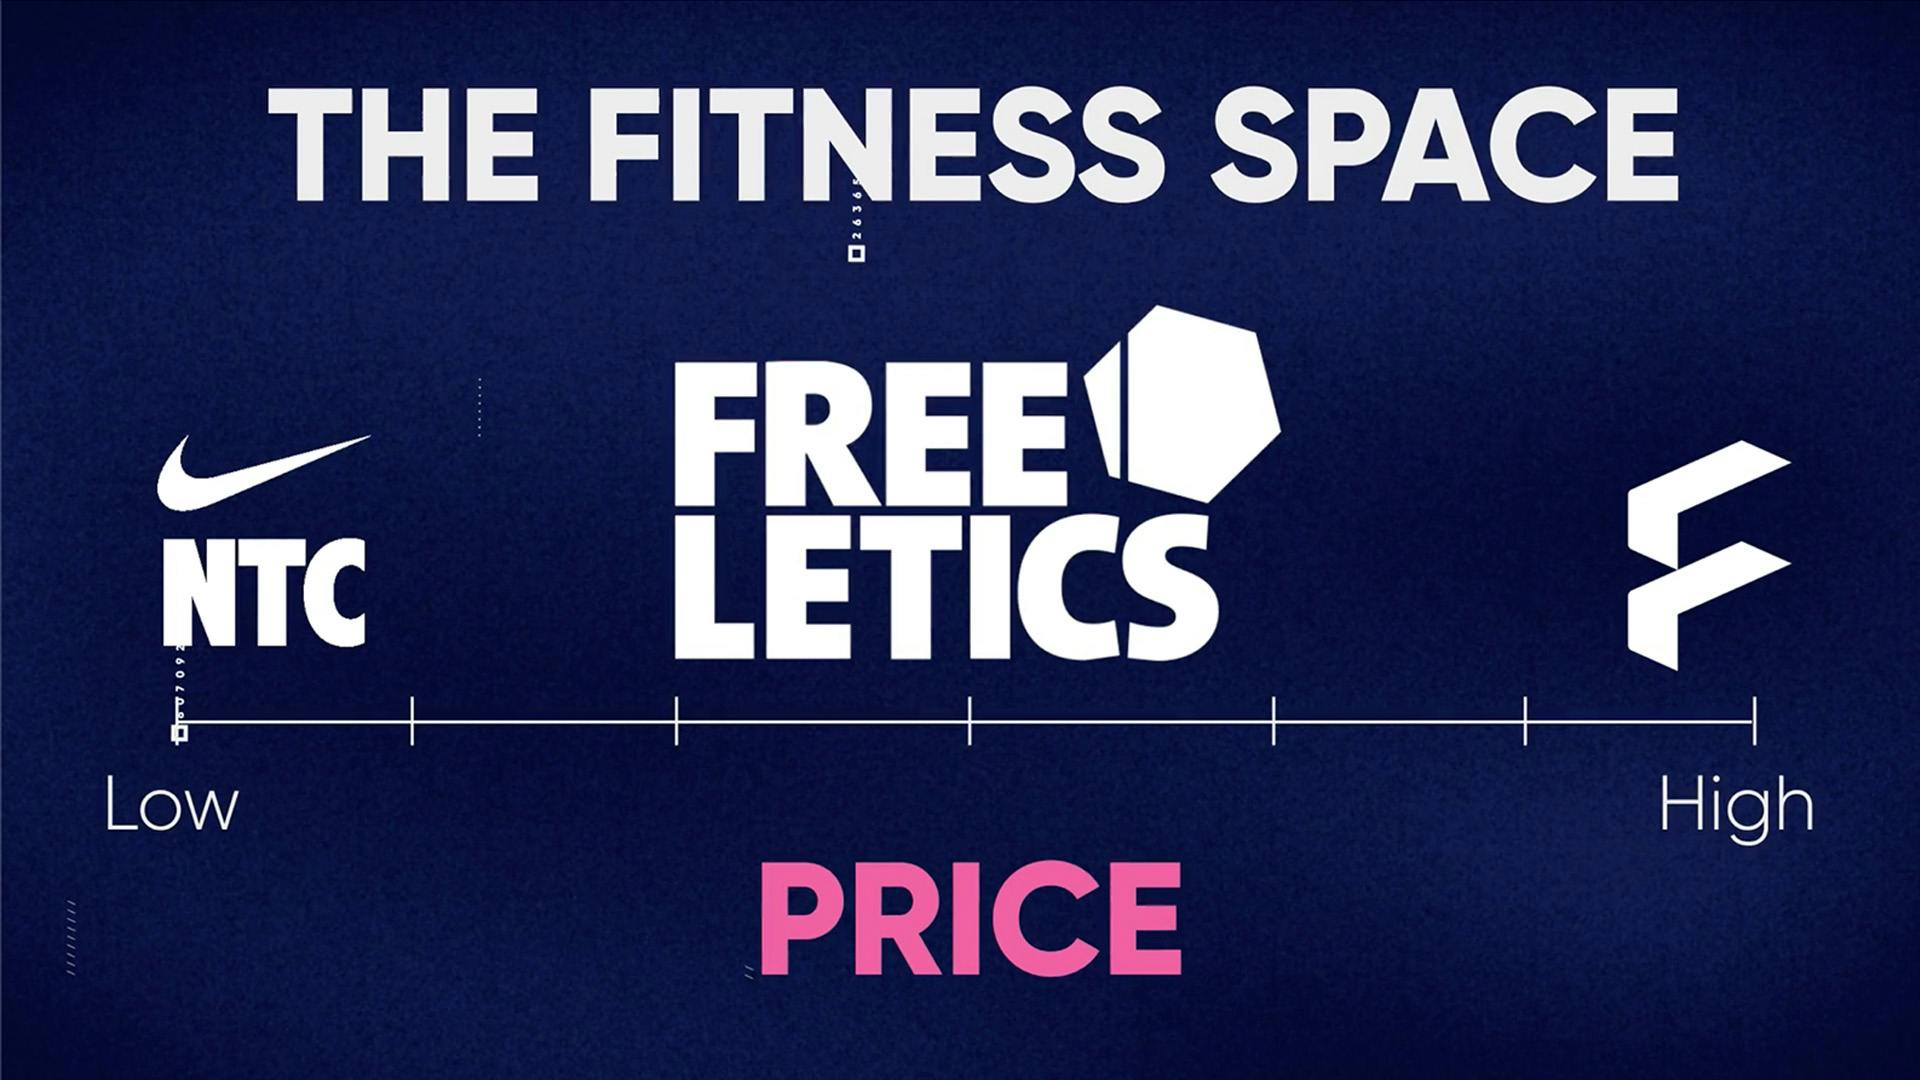 Cheap on one end and Premium on the other. Freeletics falls somewhere in between